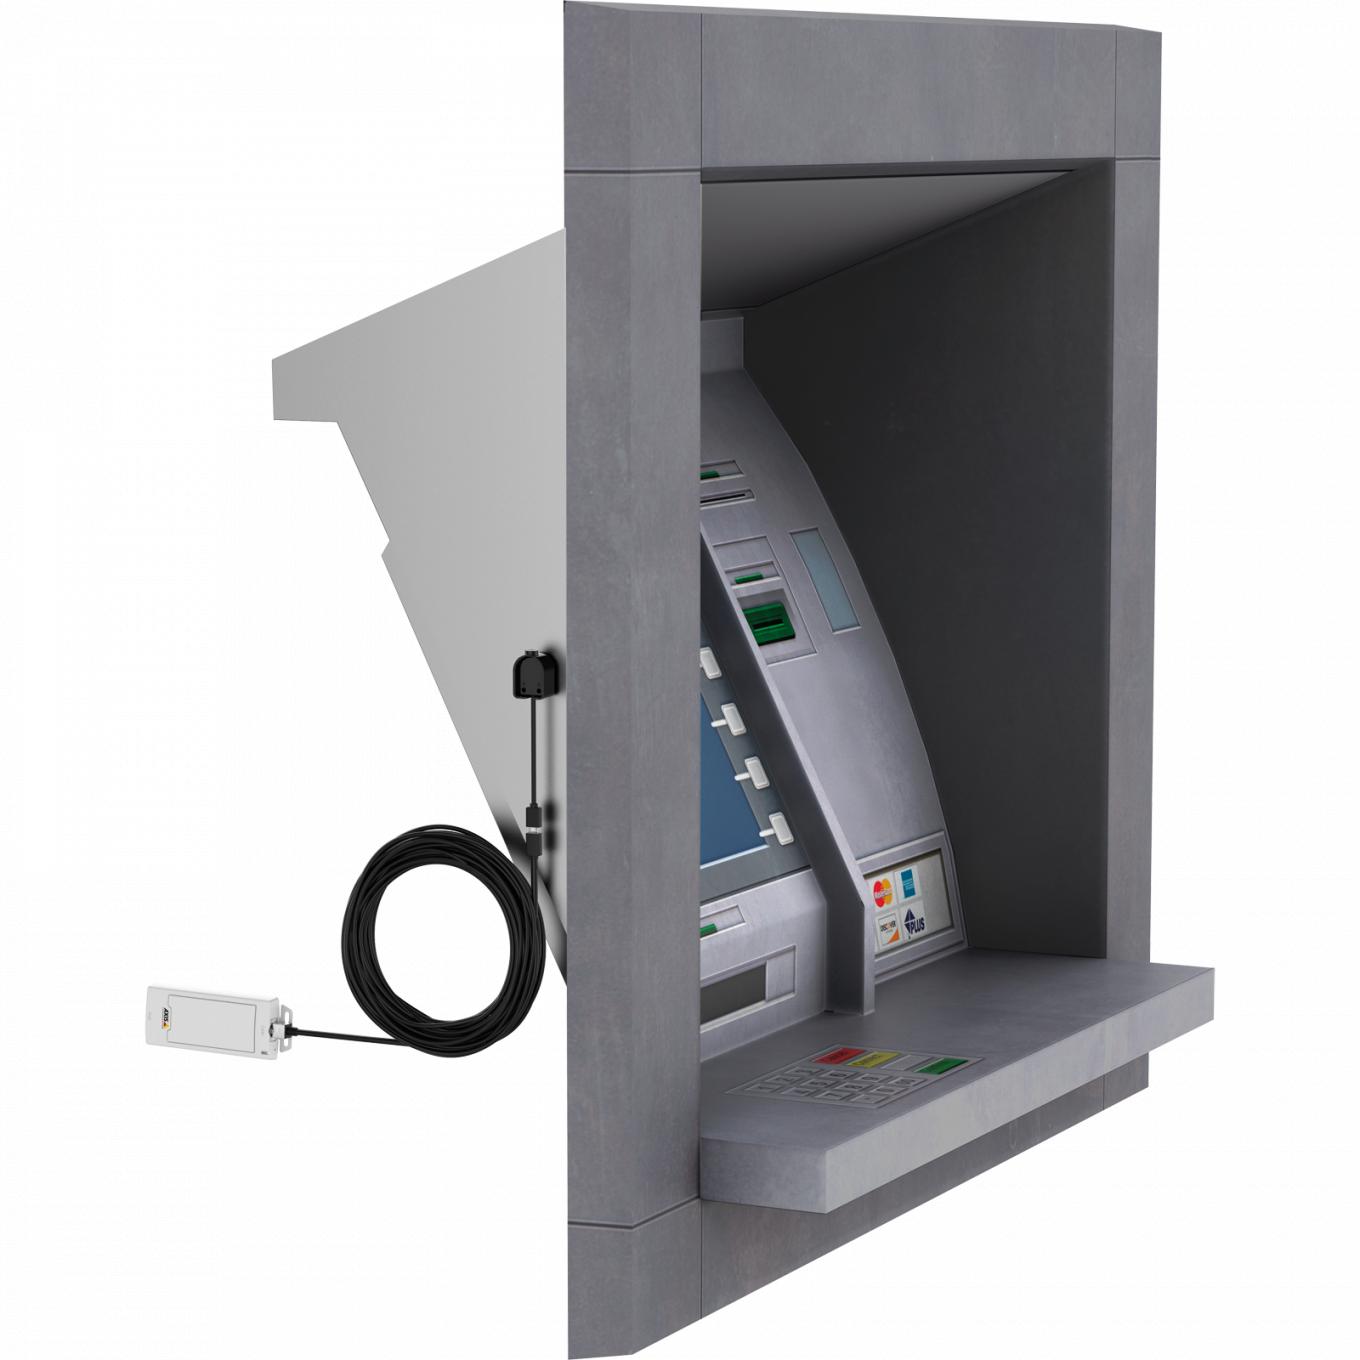 AXIS P1264 in ATM Machine from right angle